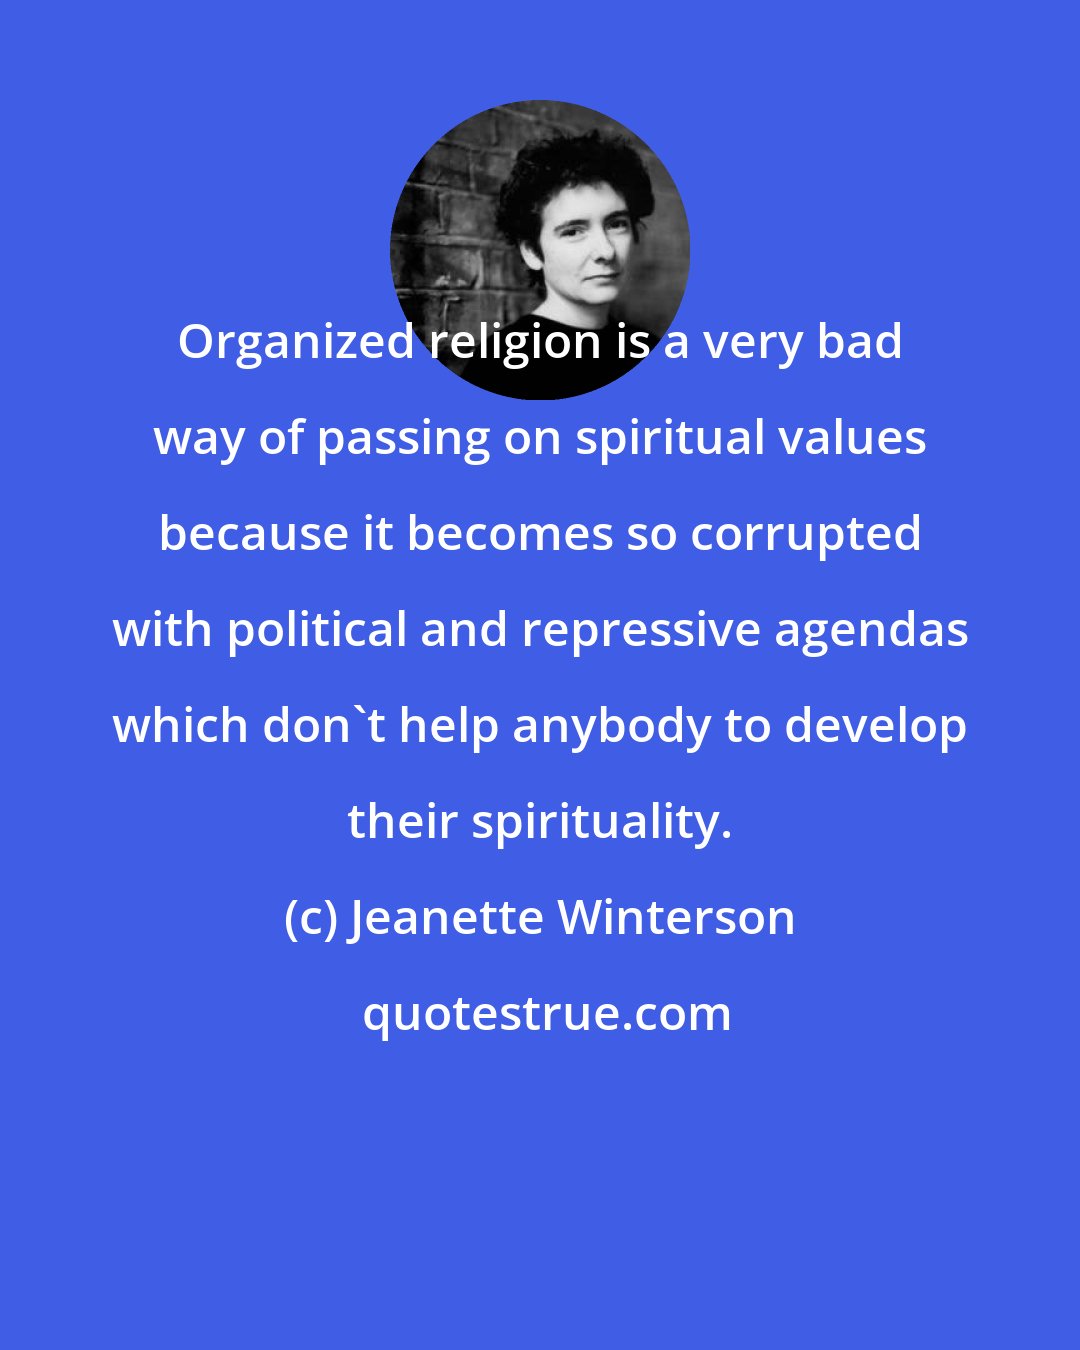 Jeanette Winterson: Organized religion is a very bad way of passing on spiritual values because it becomes so corrupted with political and repressive agendas which don't help anybody to develop their spirituality.